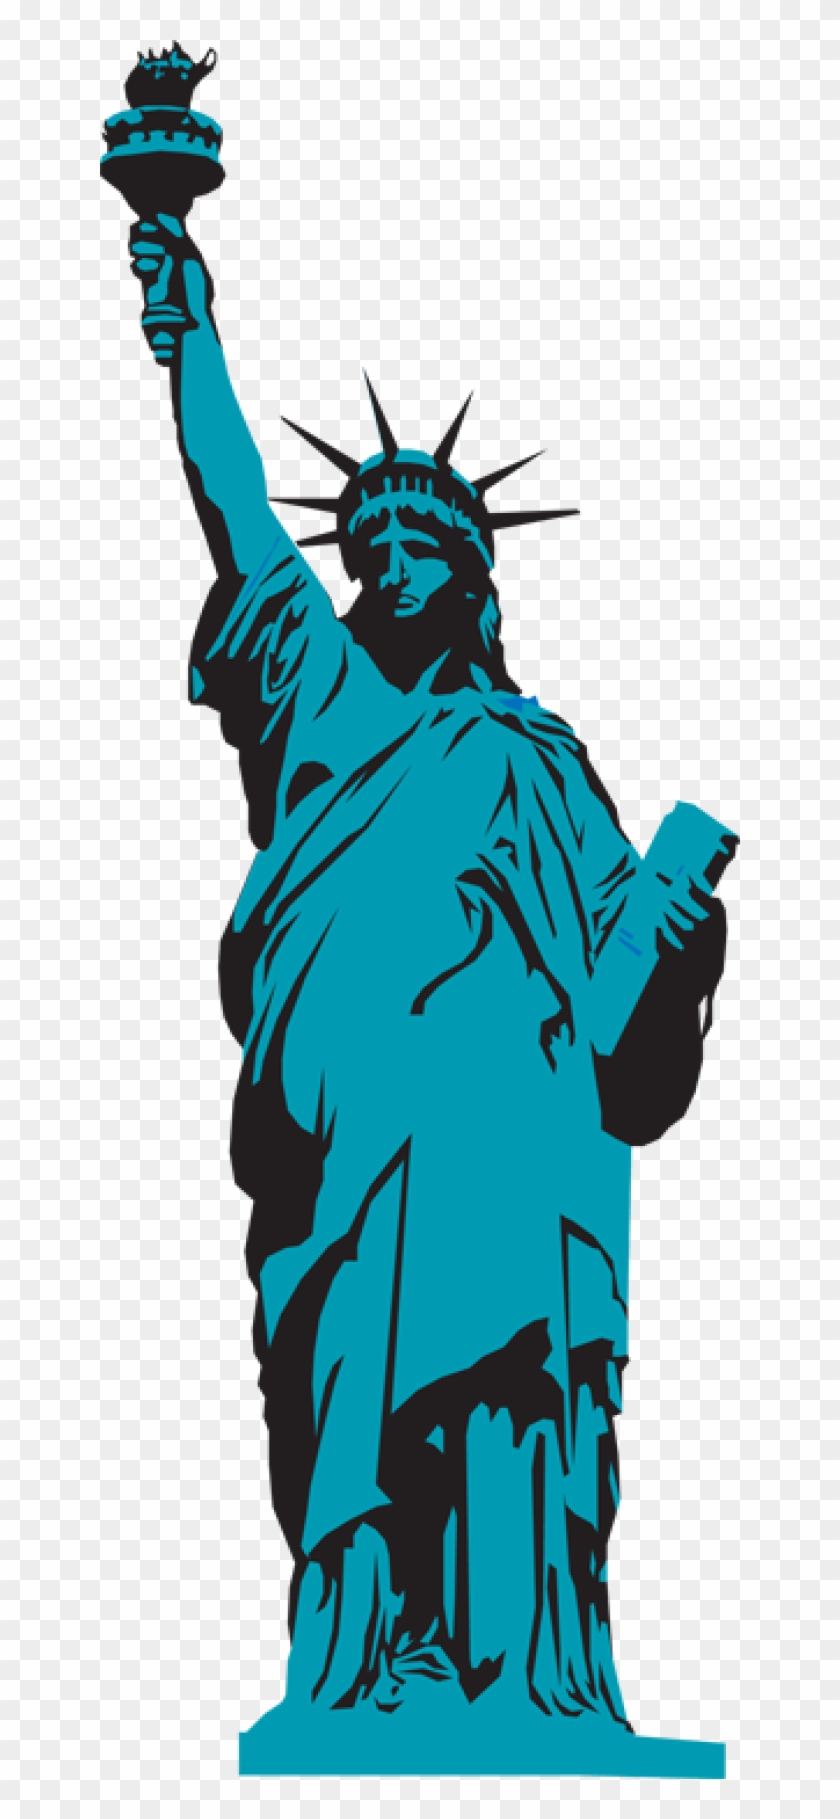 Statue Of Liberty Clipart Free - Statue Of Liberty - Png Download #2744680